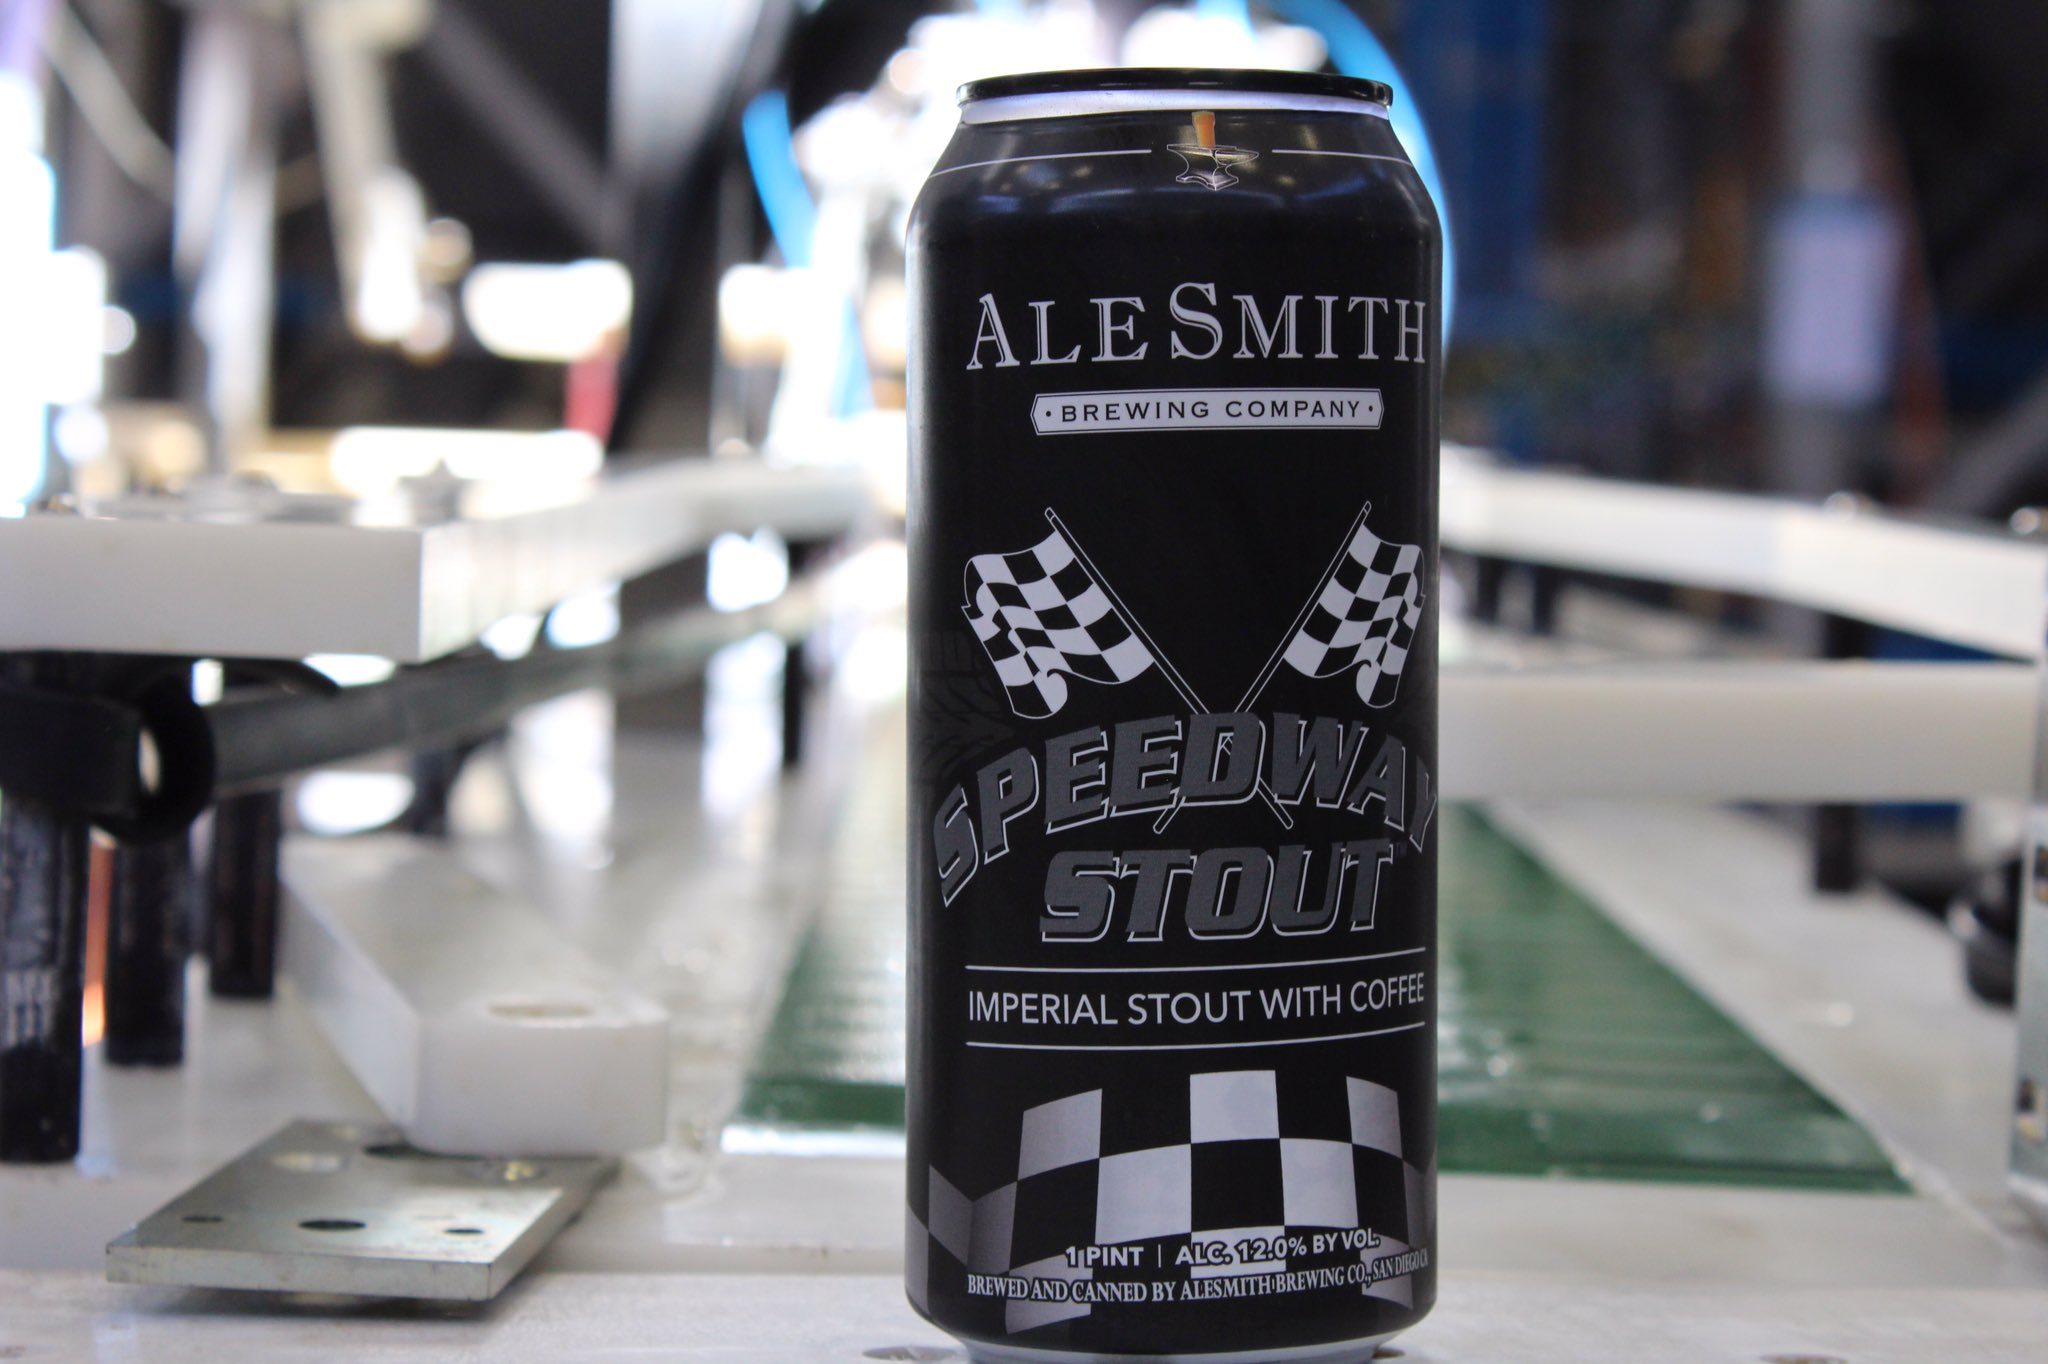 Alesmith Speedway Stout cans